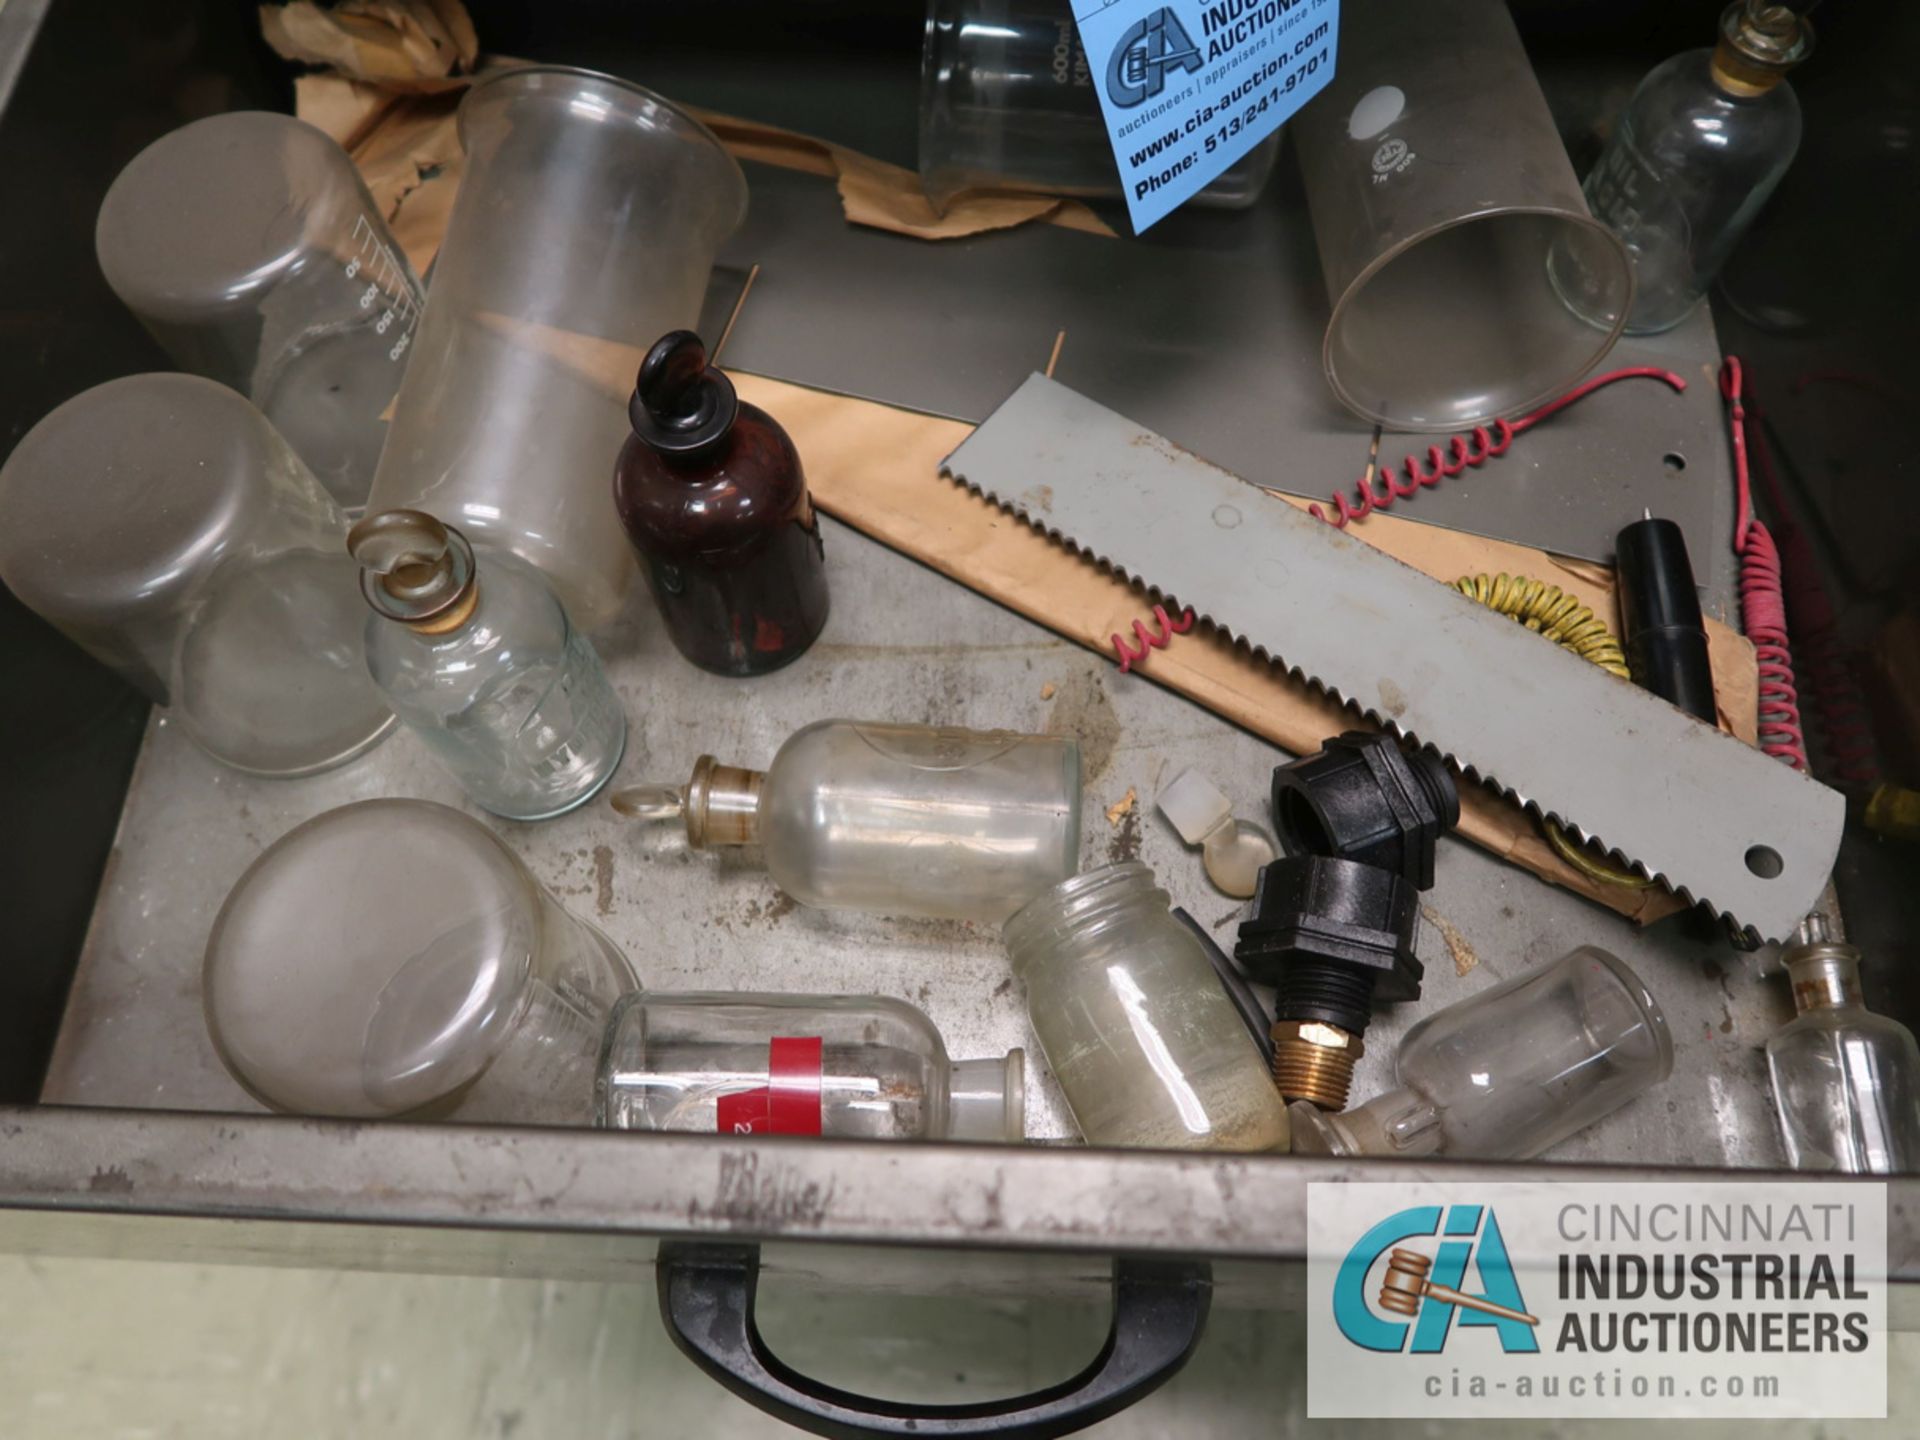 CABINET AND CONTENTS IN LAB INCLUDING MISCELLANEOUS LAB GLASS, BALANCERS, SAMPLING TOOLS, HOT PLATE - Image 5 of 8